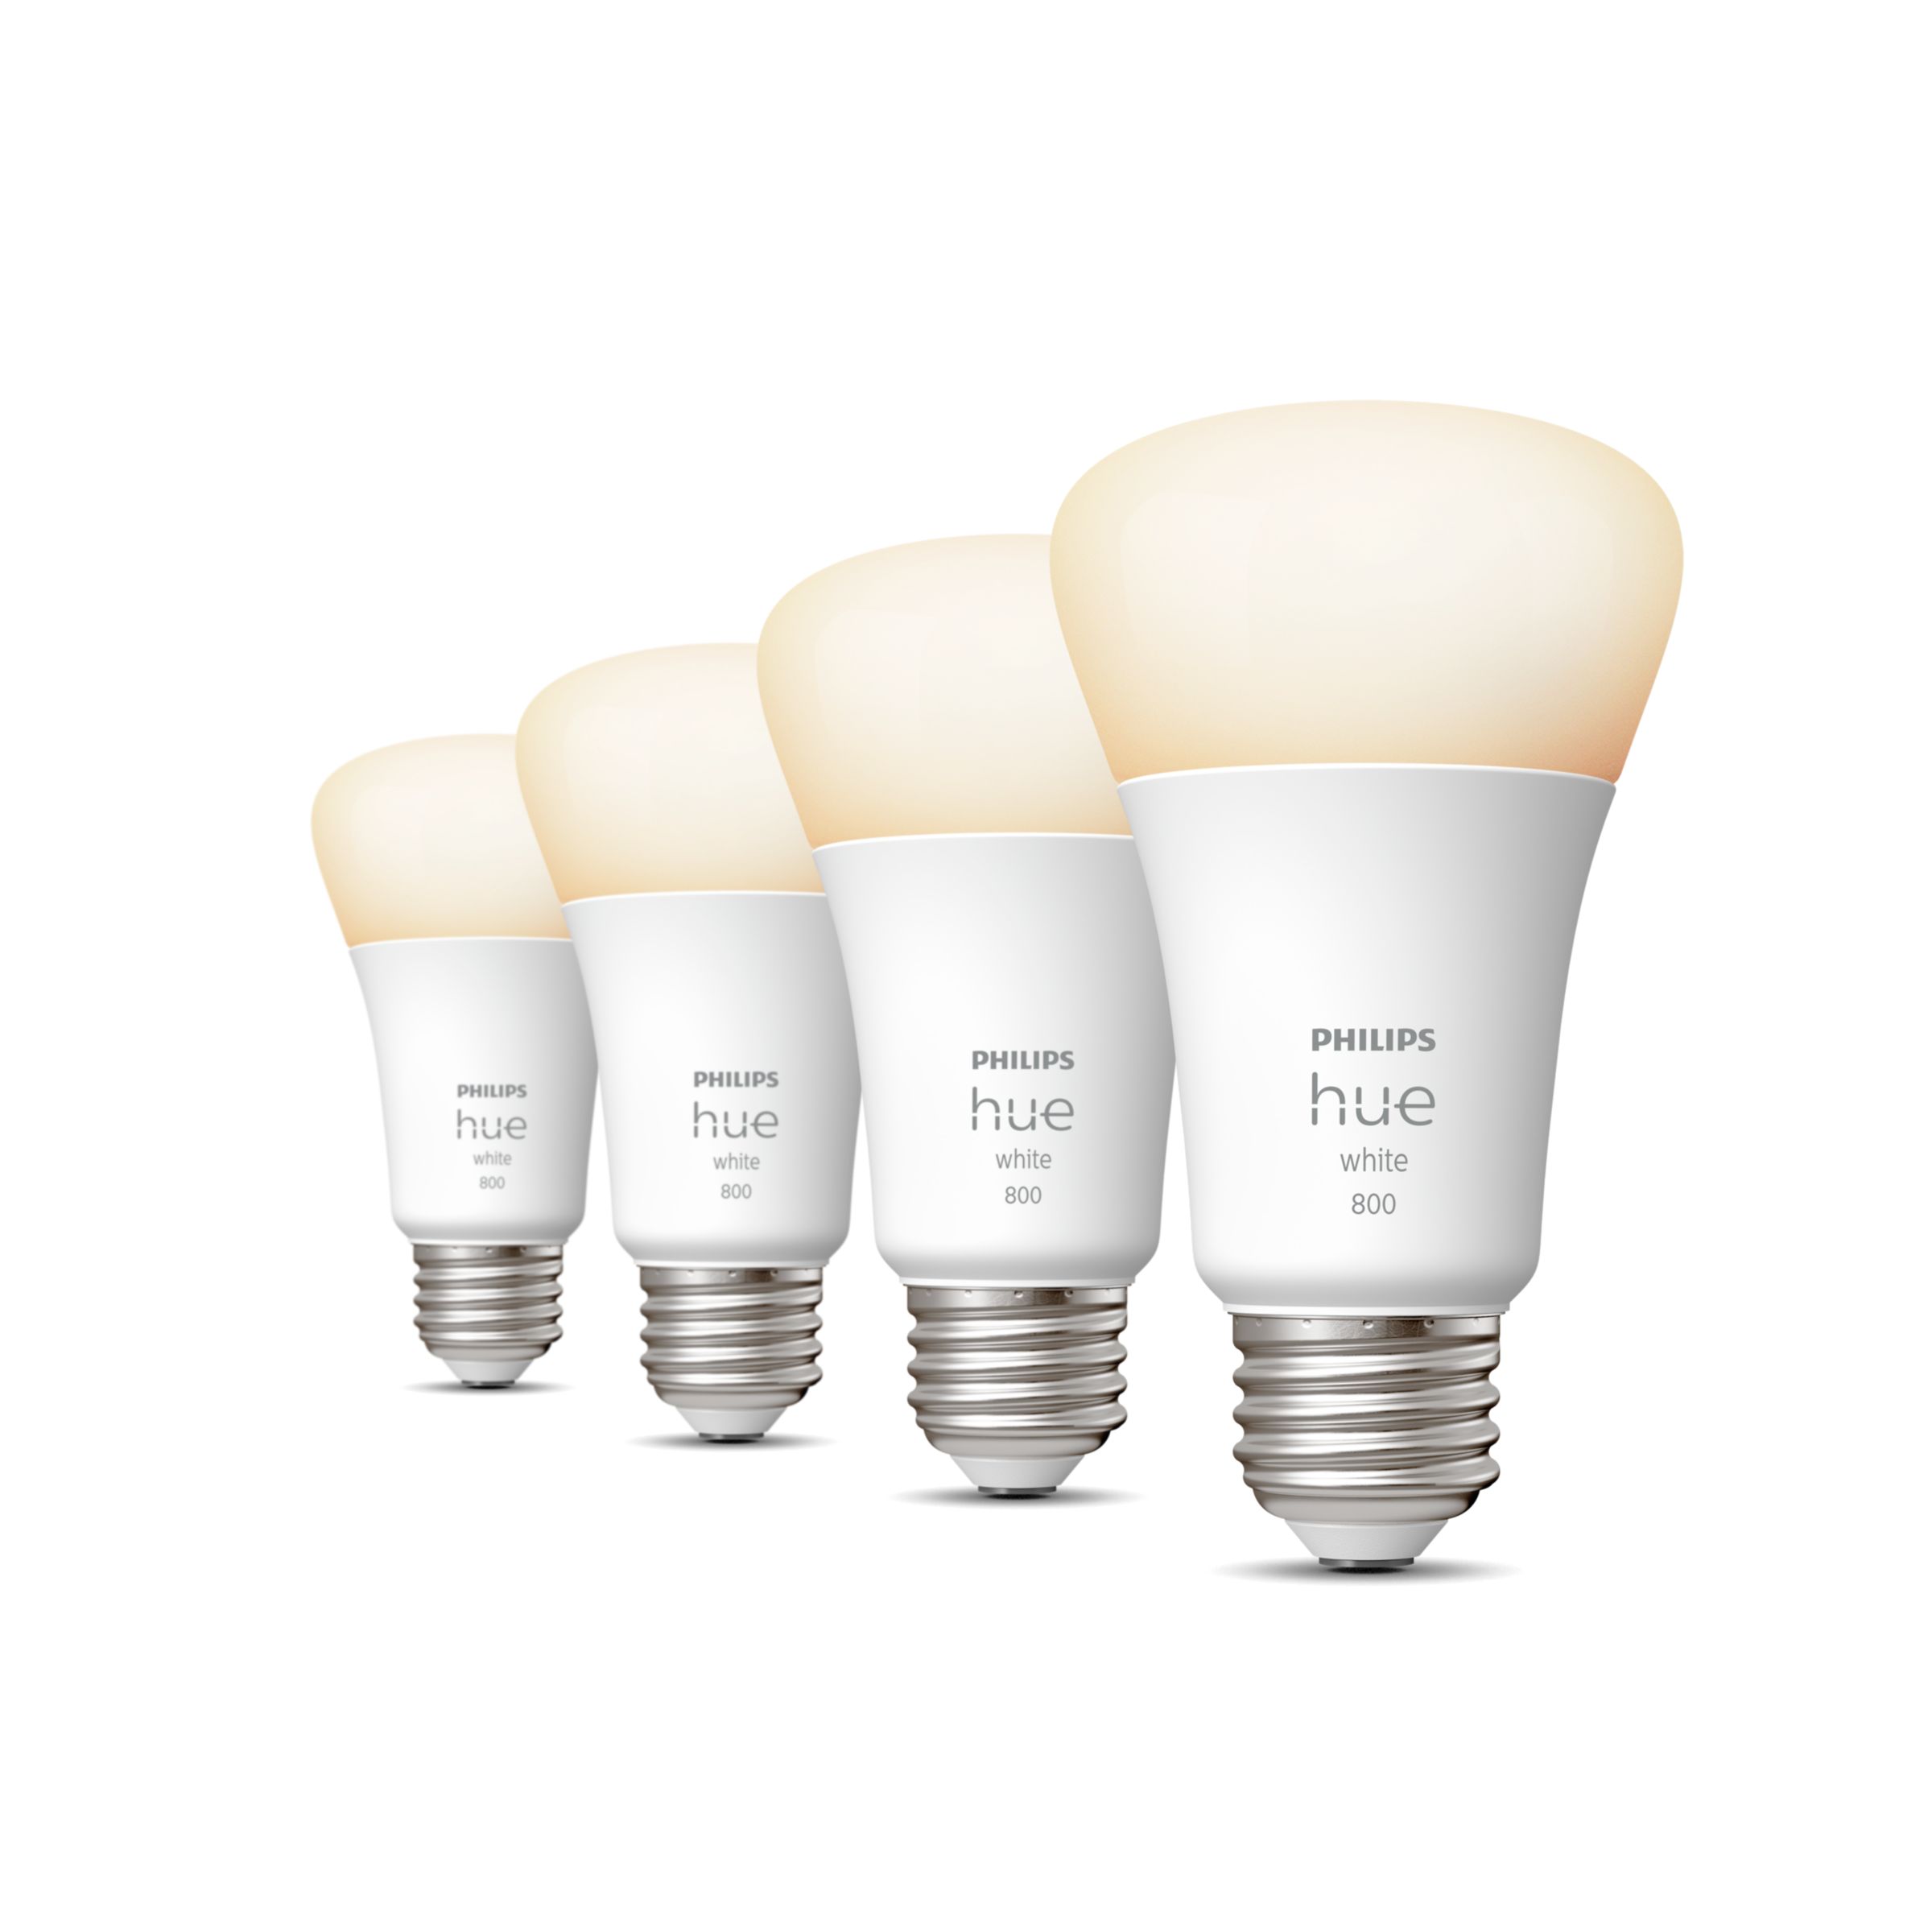 Philips Hue 1100lm White and Color E27, 6-pack